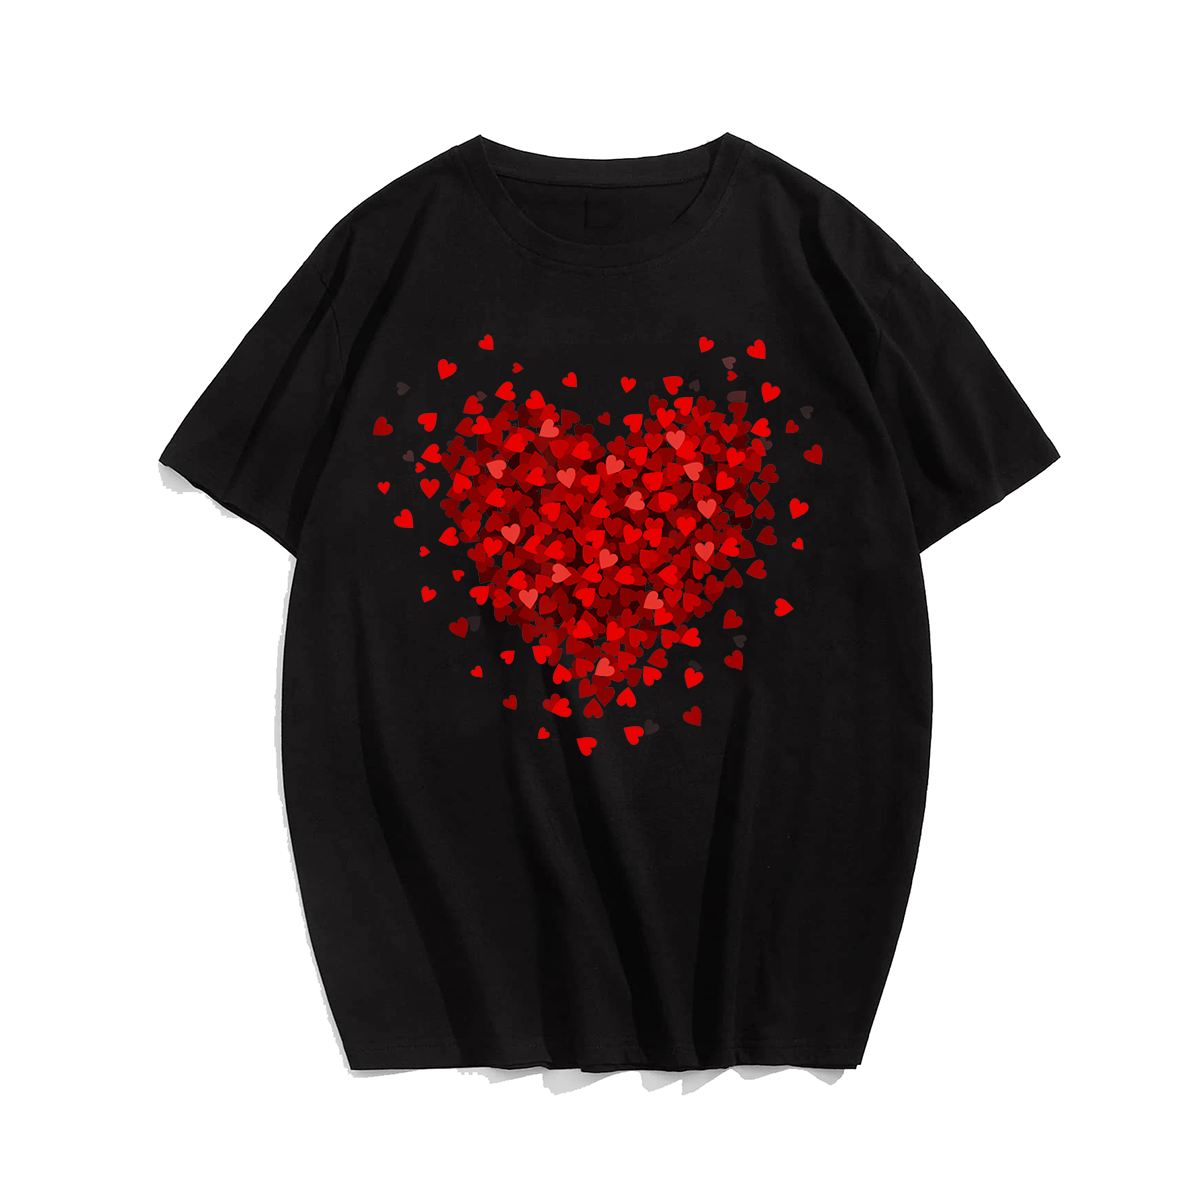 Love Heart Graphic Valentine's Day T-Shirt, Men Plus Size Oversize T-shirt for Big & Tall Man